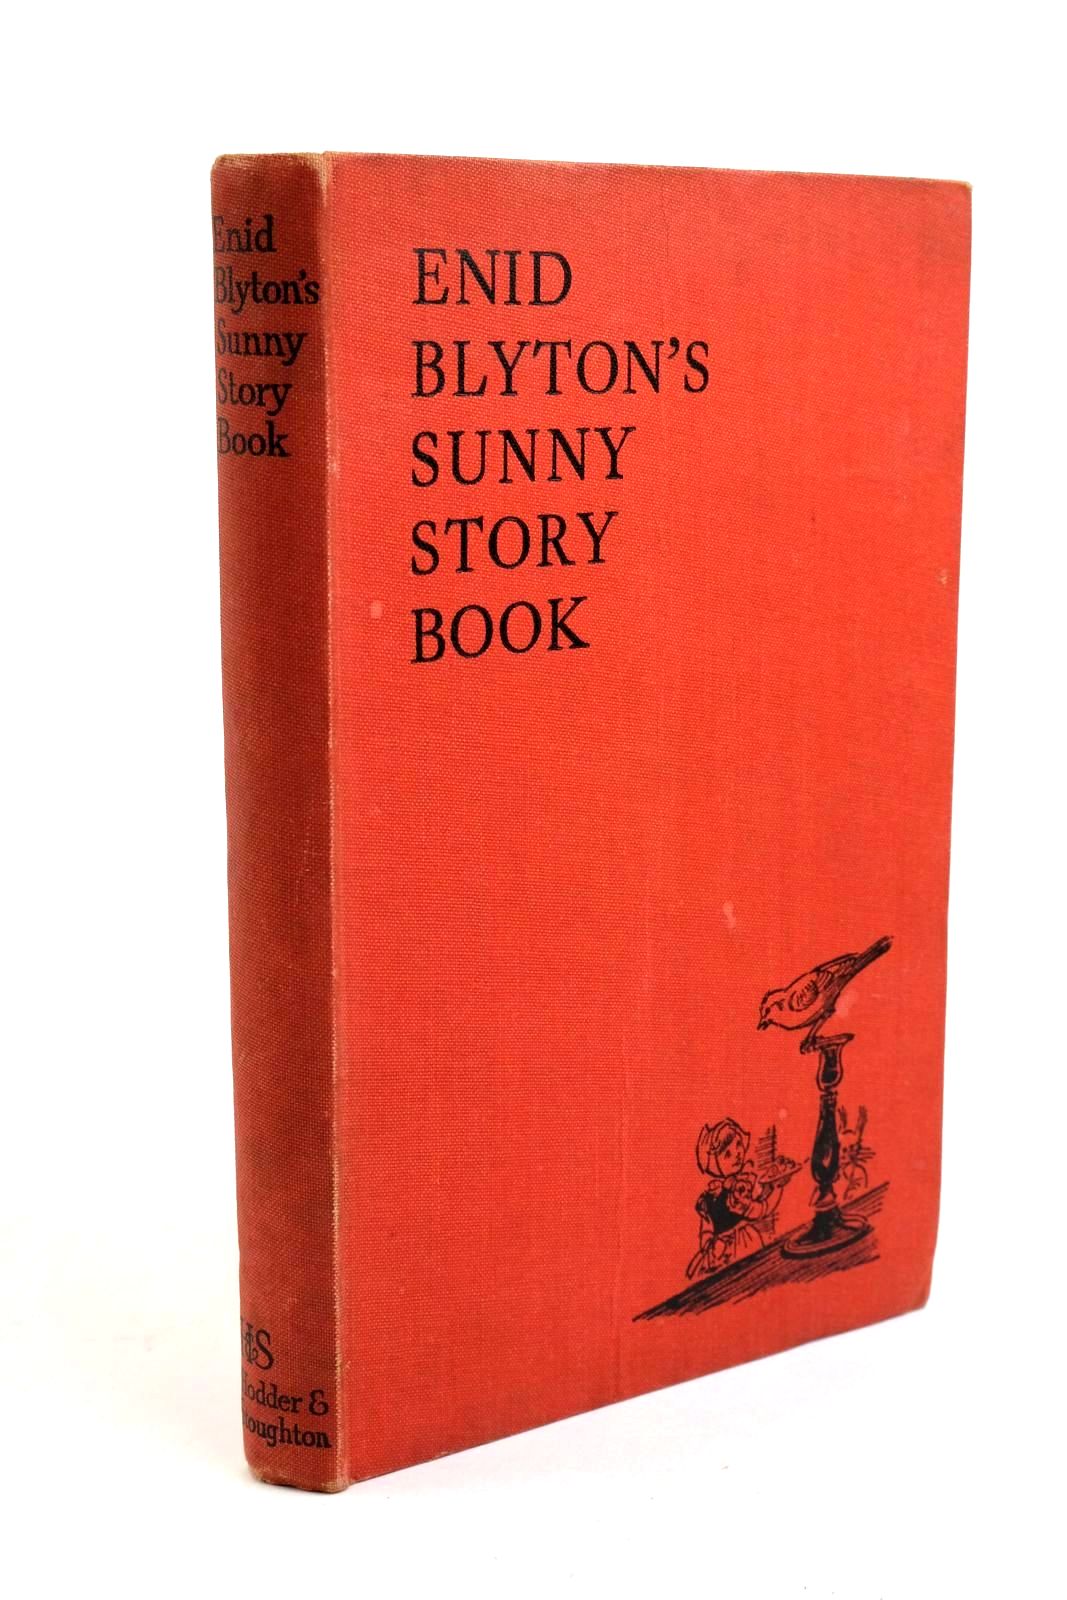 Photo of ENID BLYTON'S SUNNY STORY BOOK written by Blyton, Enid illustrated by Soper, Eileen published by Hodder &amp; Stoughton (STOCK CODE: 1321813)  for sale by Stella & Rose's Books